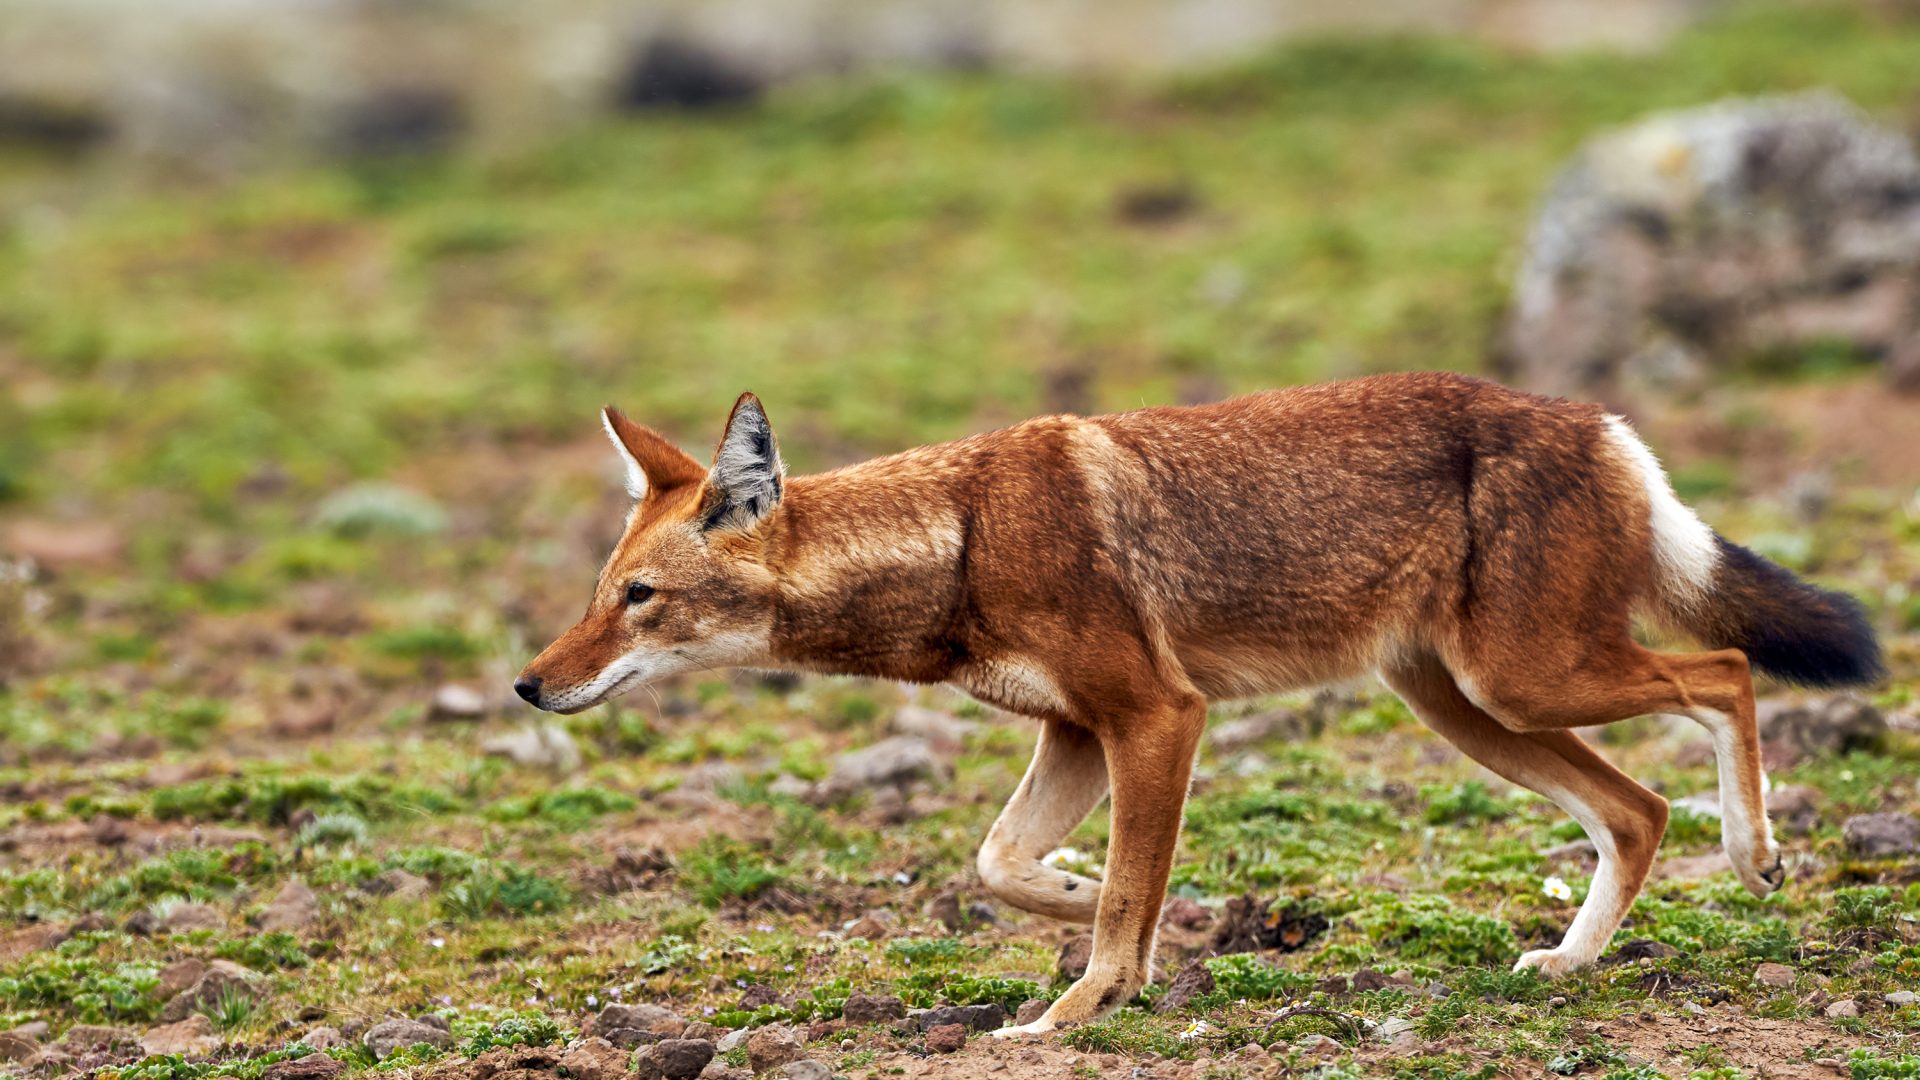 An Ethiopian wolf in the Bale Mountains.